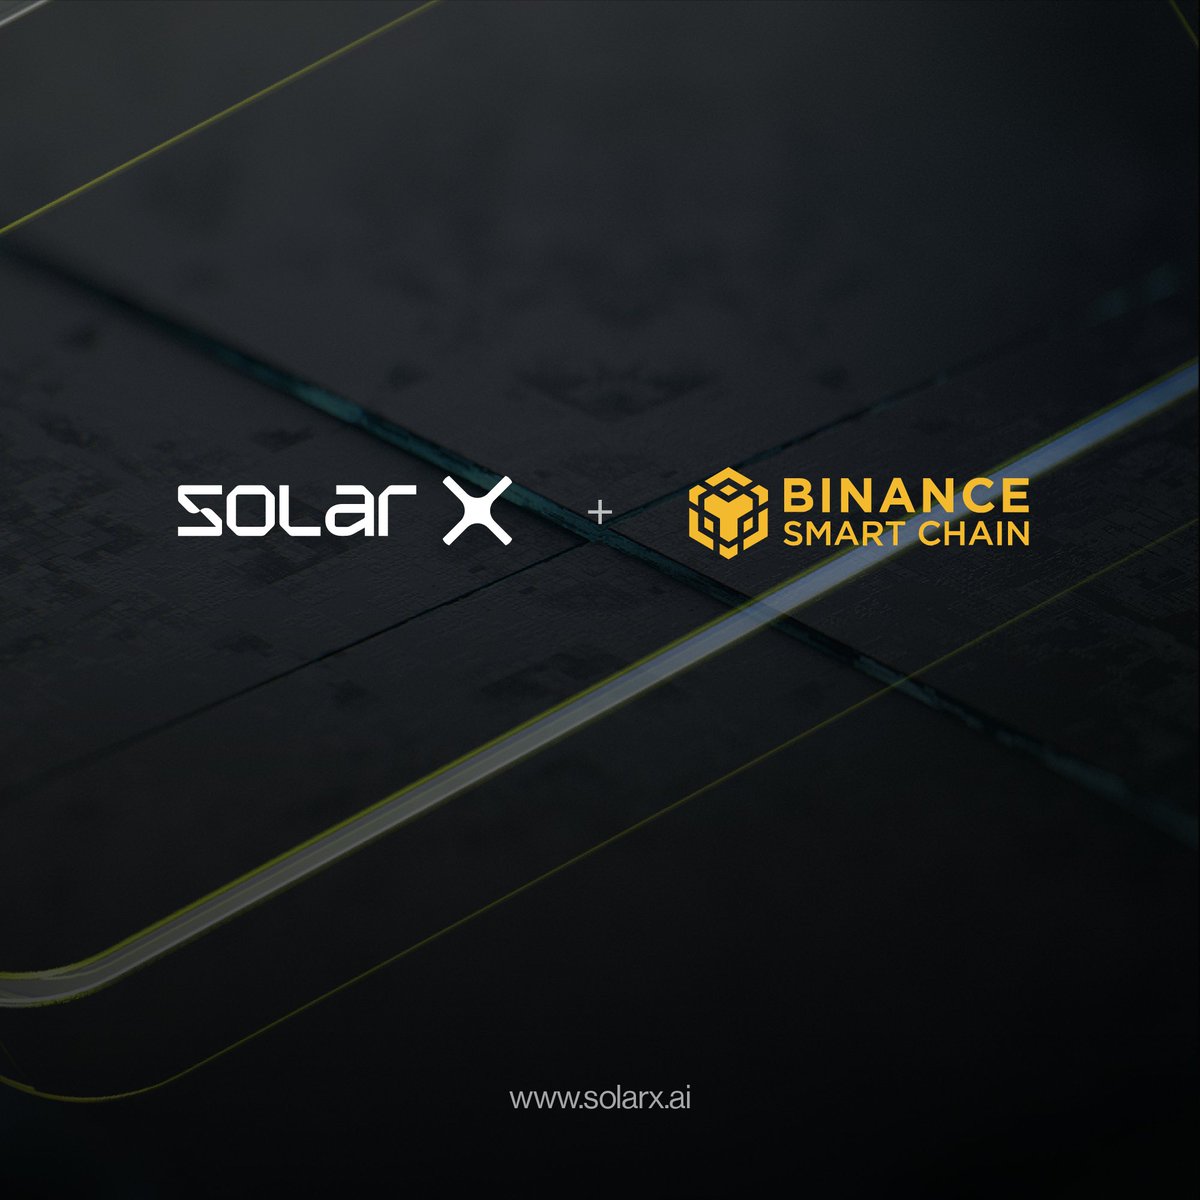 We're thrilled to announce our partnership with @BNBCHAIN 🚀 SolarX token will now be minted on #BSC, opening up new horizons for our community. @binance @BNBCHAIN